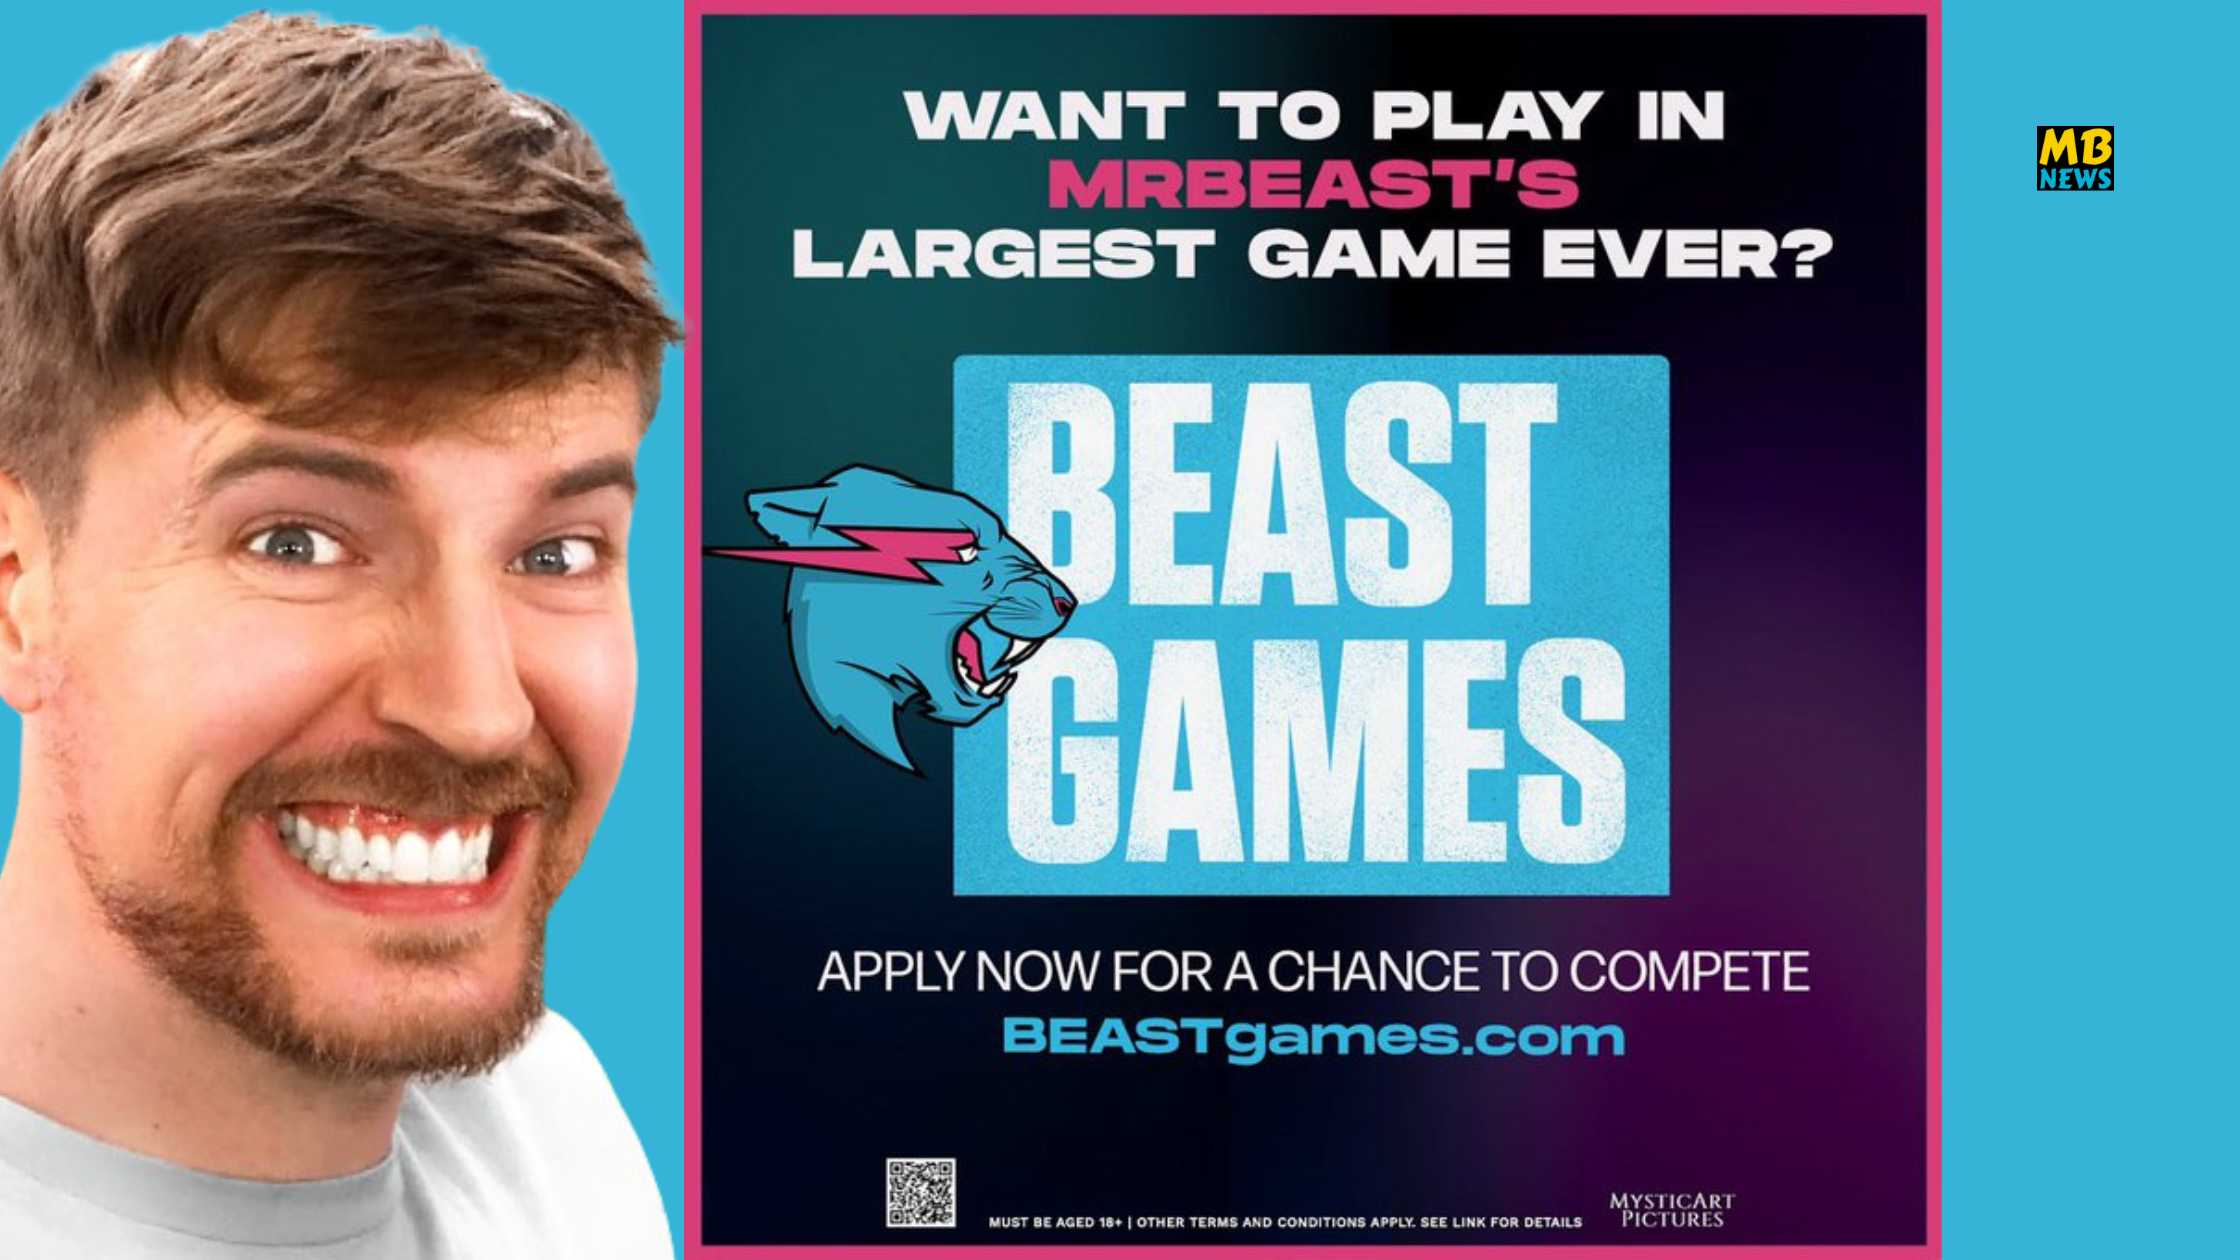 Apply Now to Compete in MrBeast's BEAST GAMES on Amazon Prime!